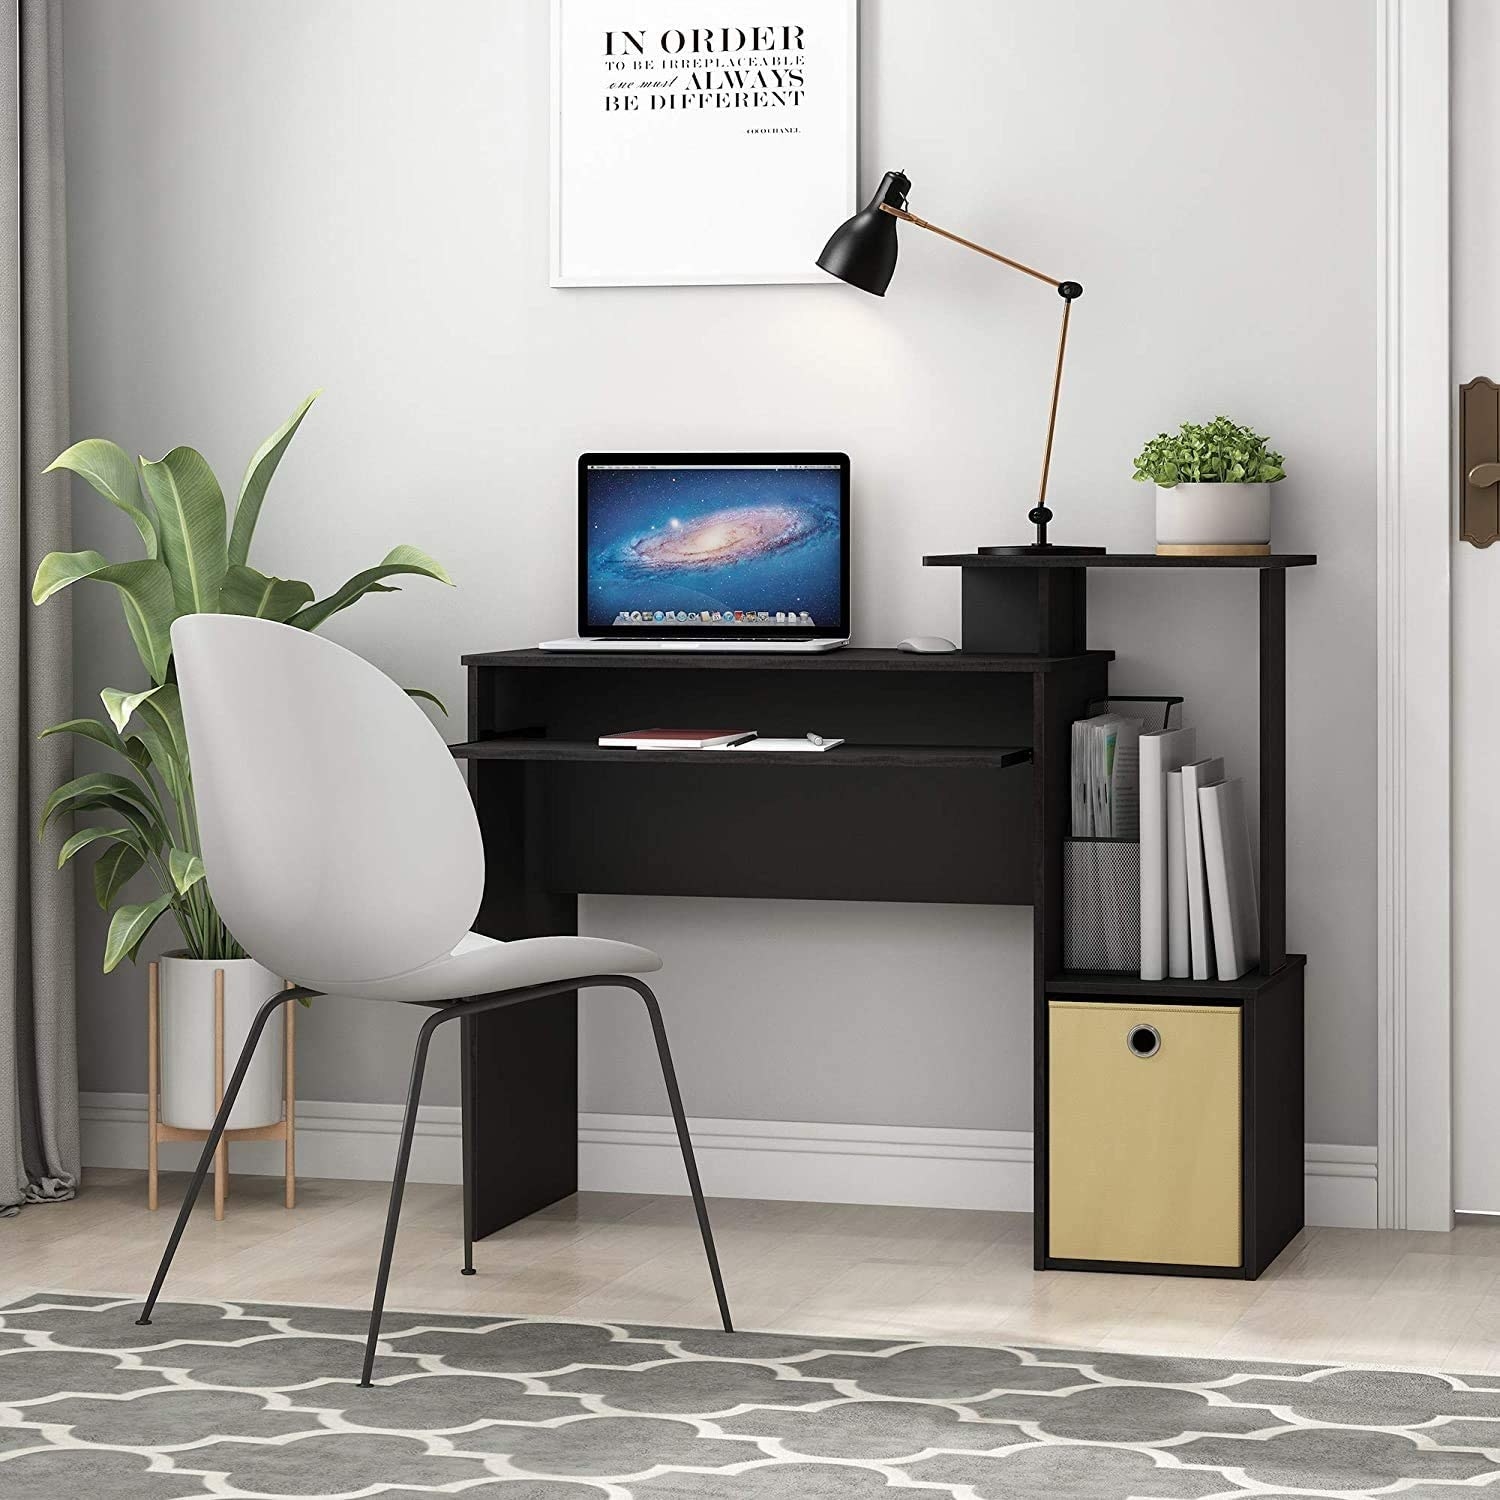 The desk with a computer and books on it